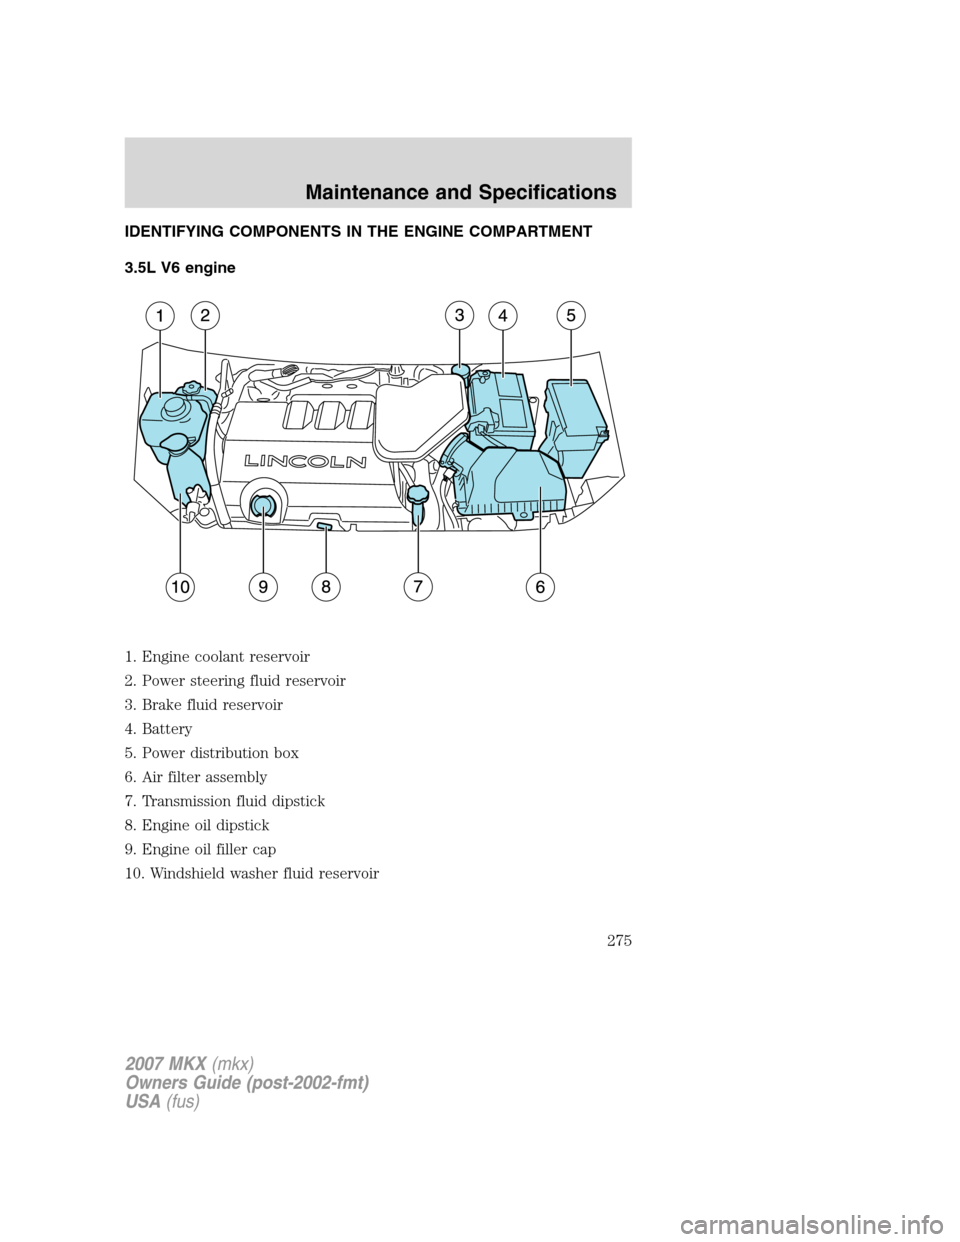 LINCOLN MKX 2007  Owners Manual IDENTIFYING COMPONENTS IN THE ENGINE COMPARTMENT
3.5L V6 engine
1. Engine coolant reservoir
2. Power steering fluid reservoir
3. Brake fluid reservoir
4. Battery
5. Power distribution box
6. Air filte